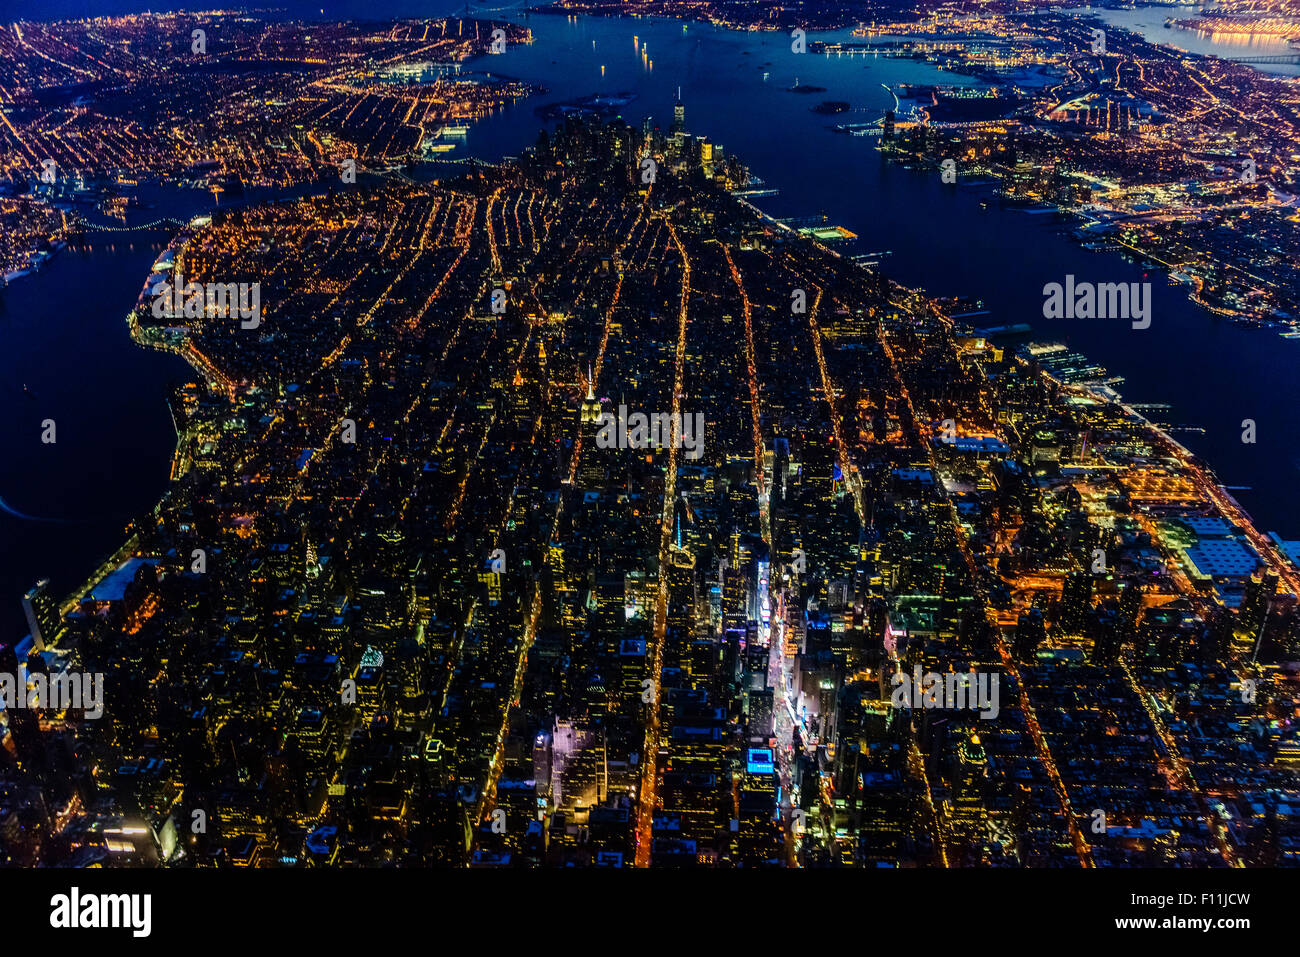 Aerial View Of Manhattan Cityscape And River At Night New York United States Stock Photo Alamy